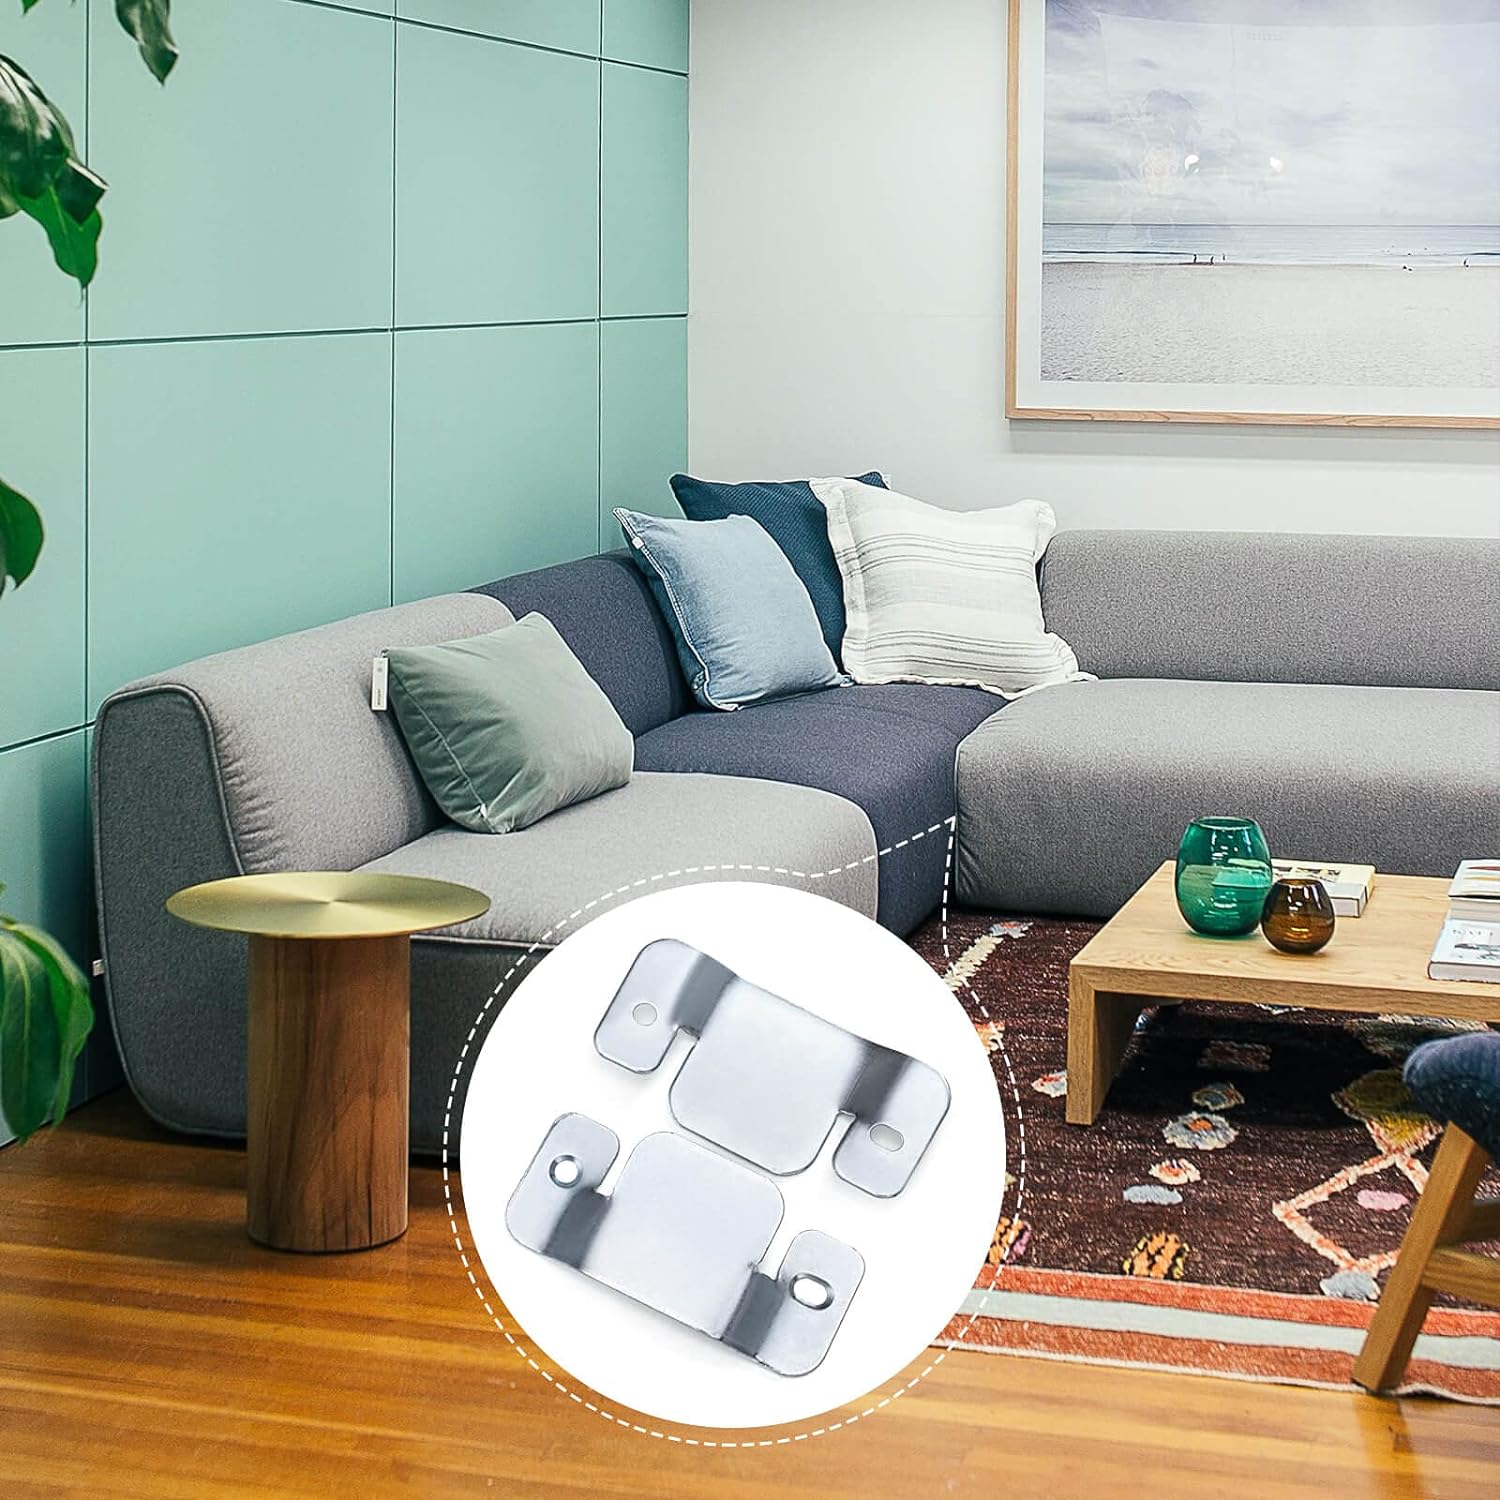 JINGYANG Sectional Couch Connectors, 3.7“ Heavy Duty Metal Interlocking  Connector for Sectional Sofa, Furniture Connector Brackets, Couch Fastener,  4Pcs 